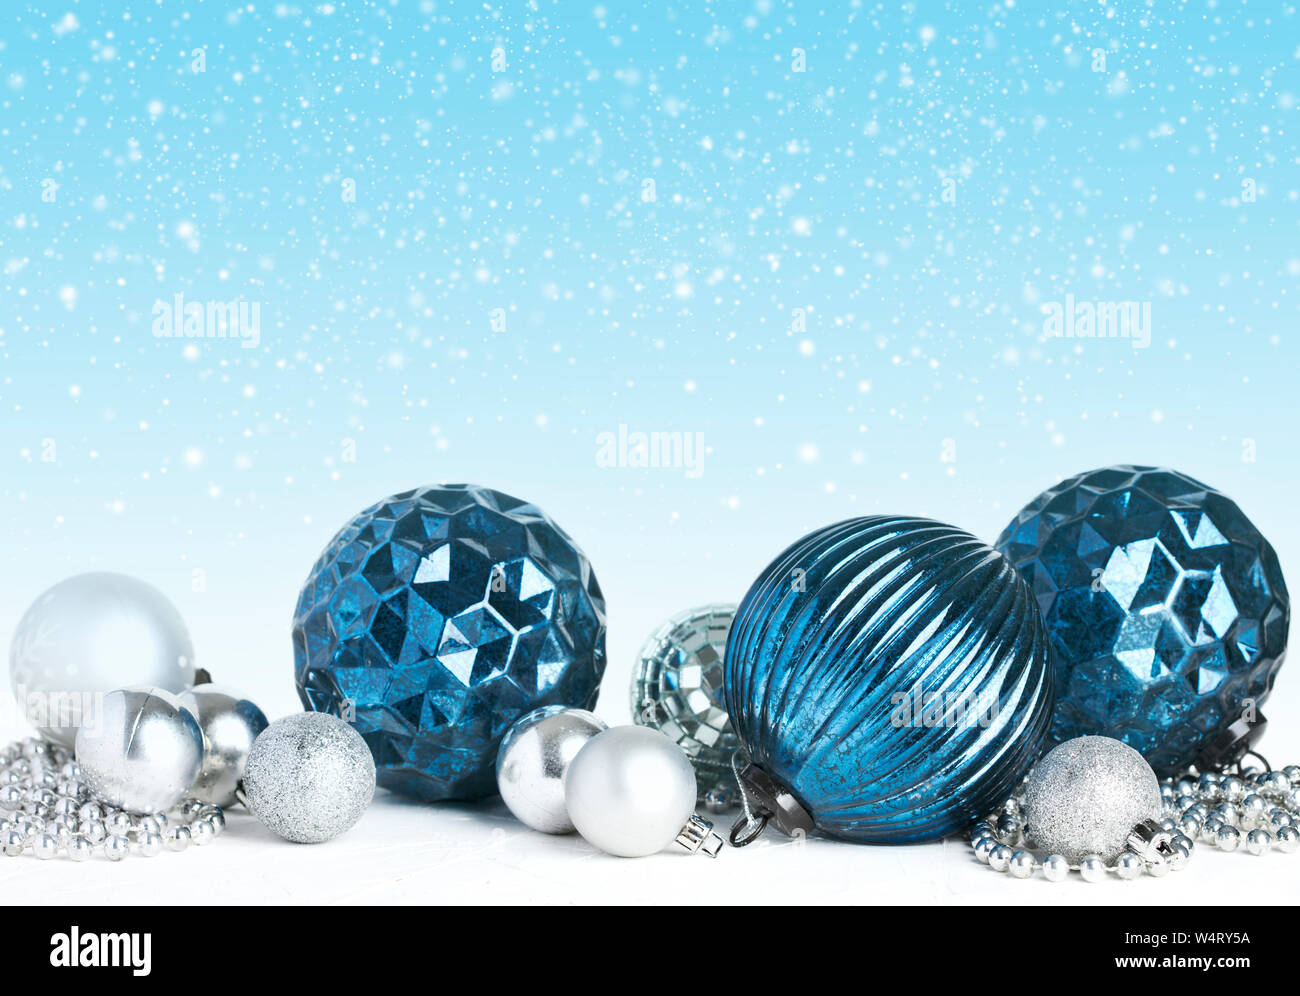 Christmas baubles and decorations Stock Photo